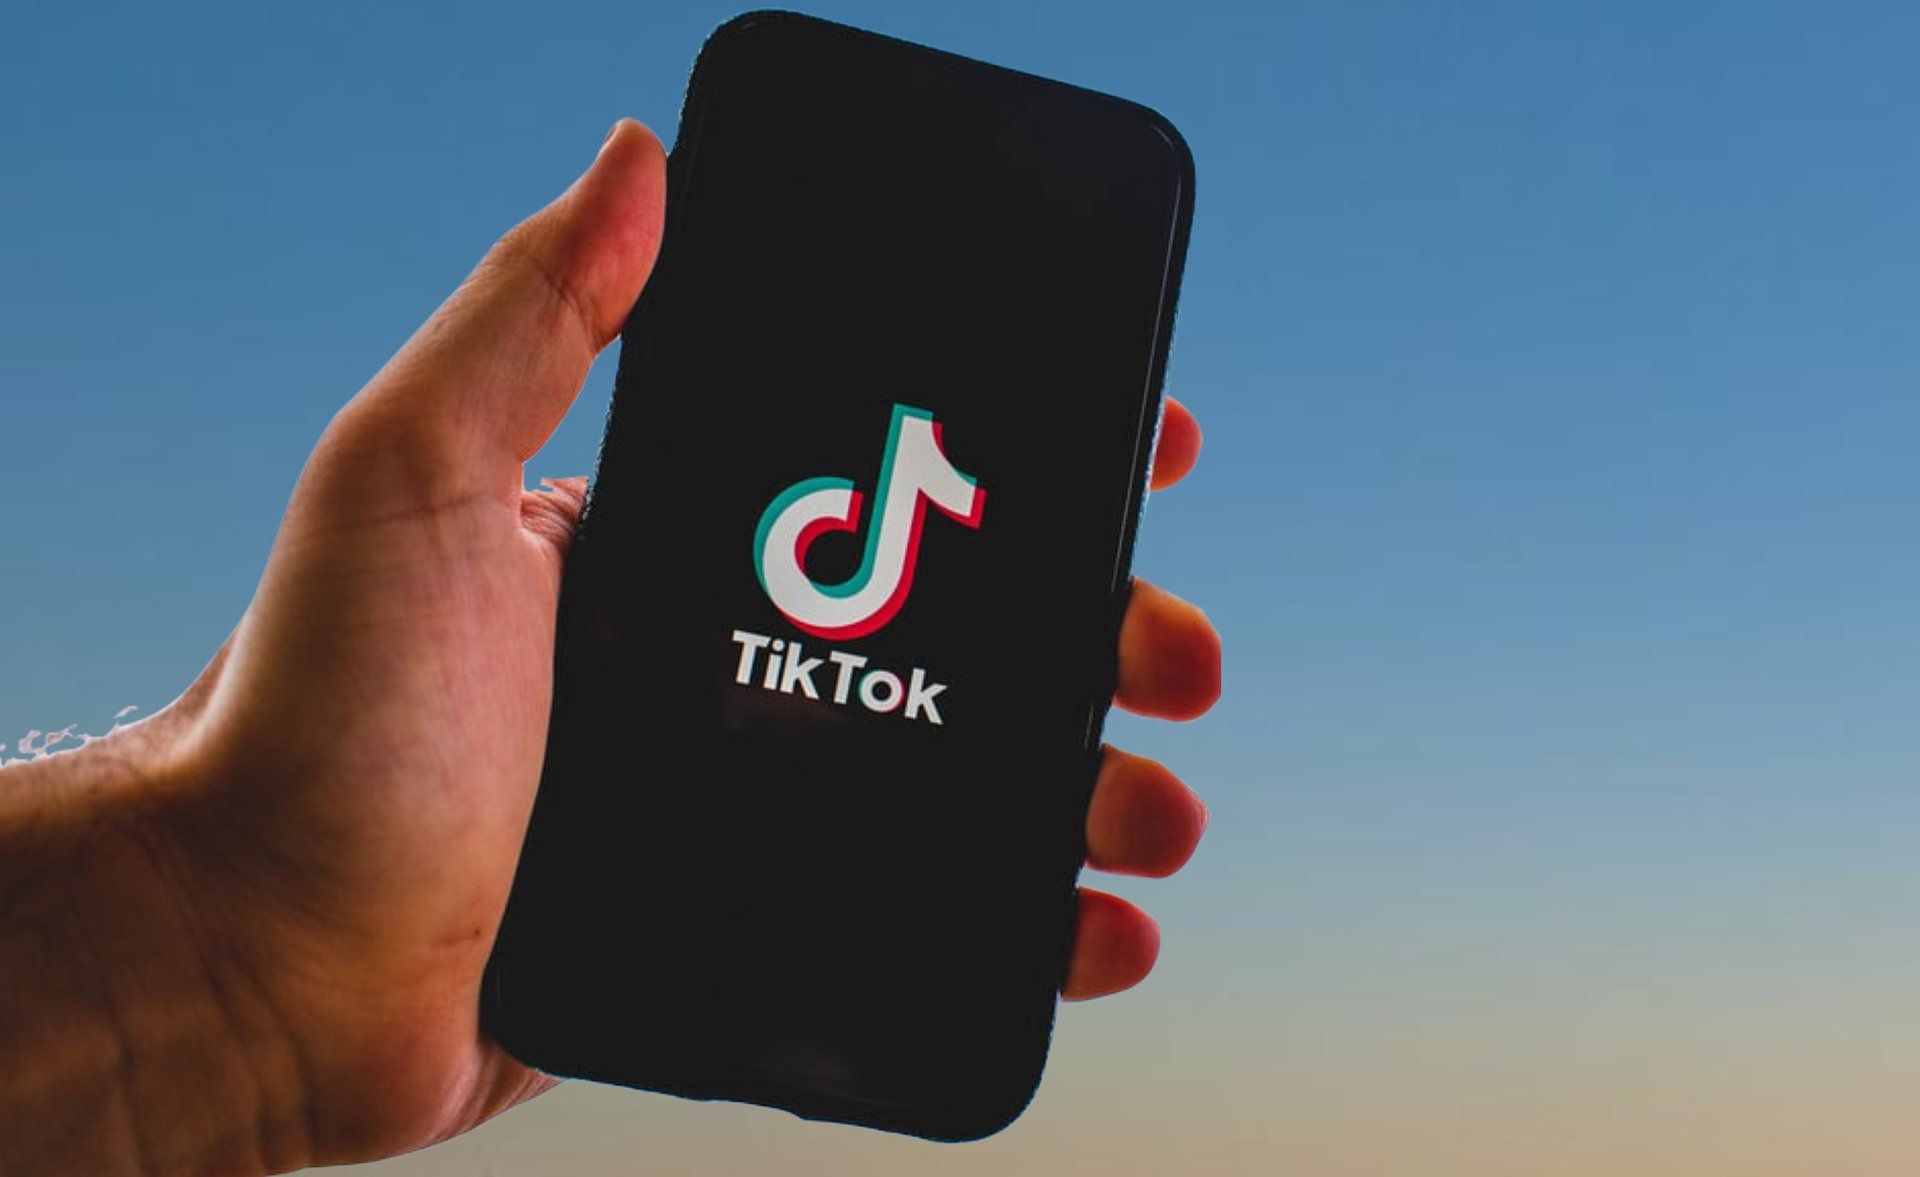 Can you remove a filter on TikTok?